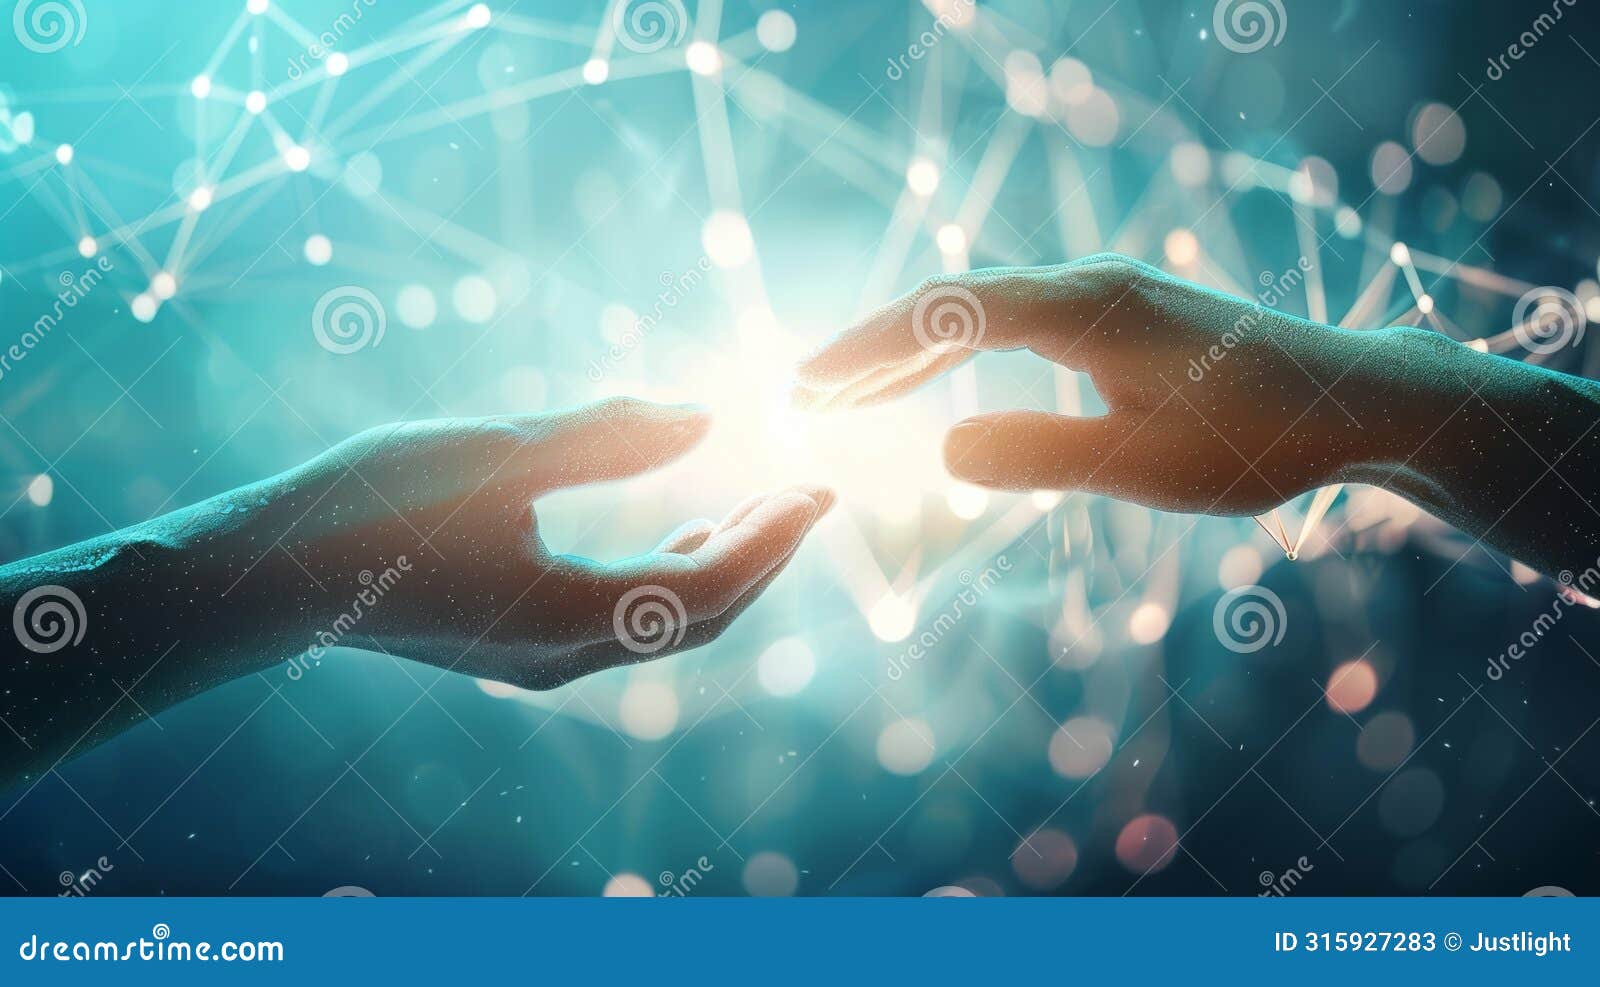 a pair of hands reaching out to shake representing the establishment of trust and partnerships between different